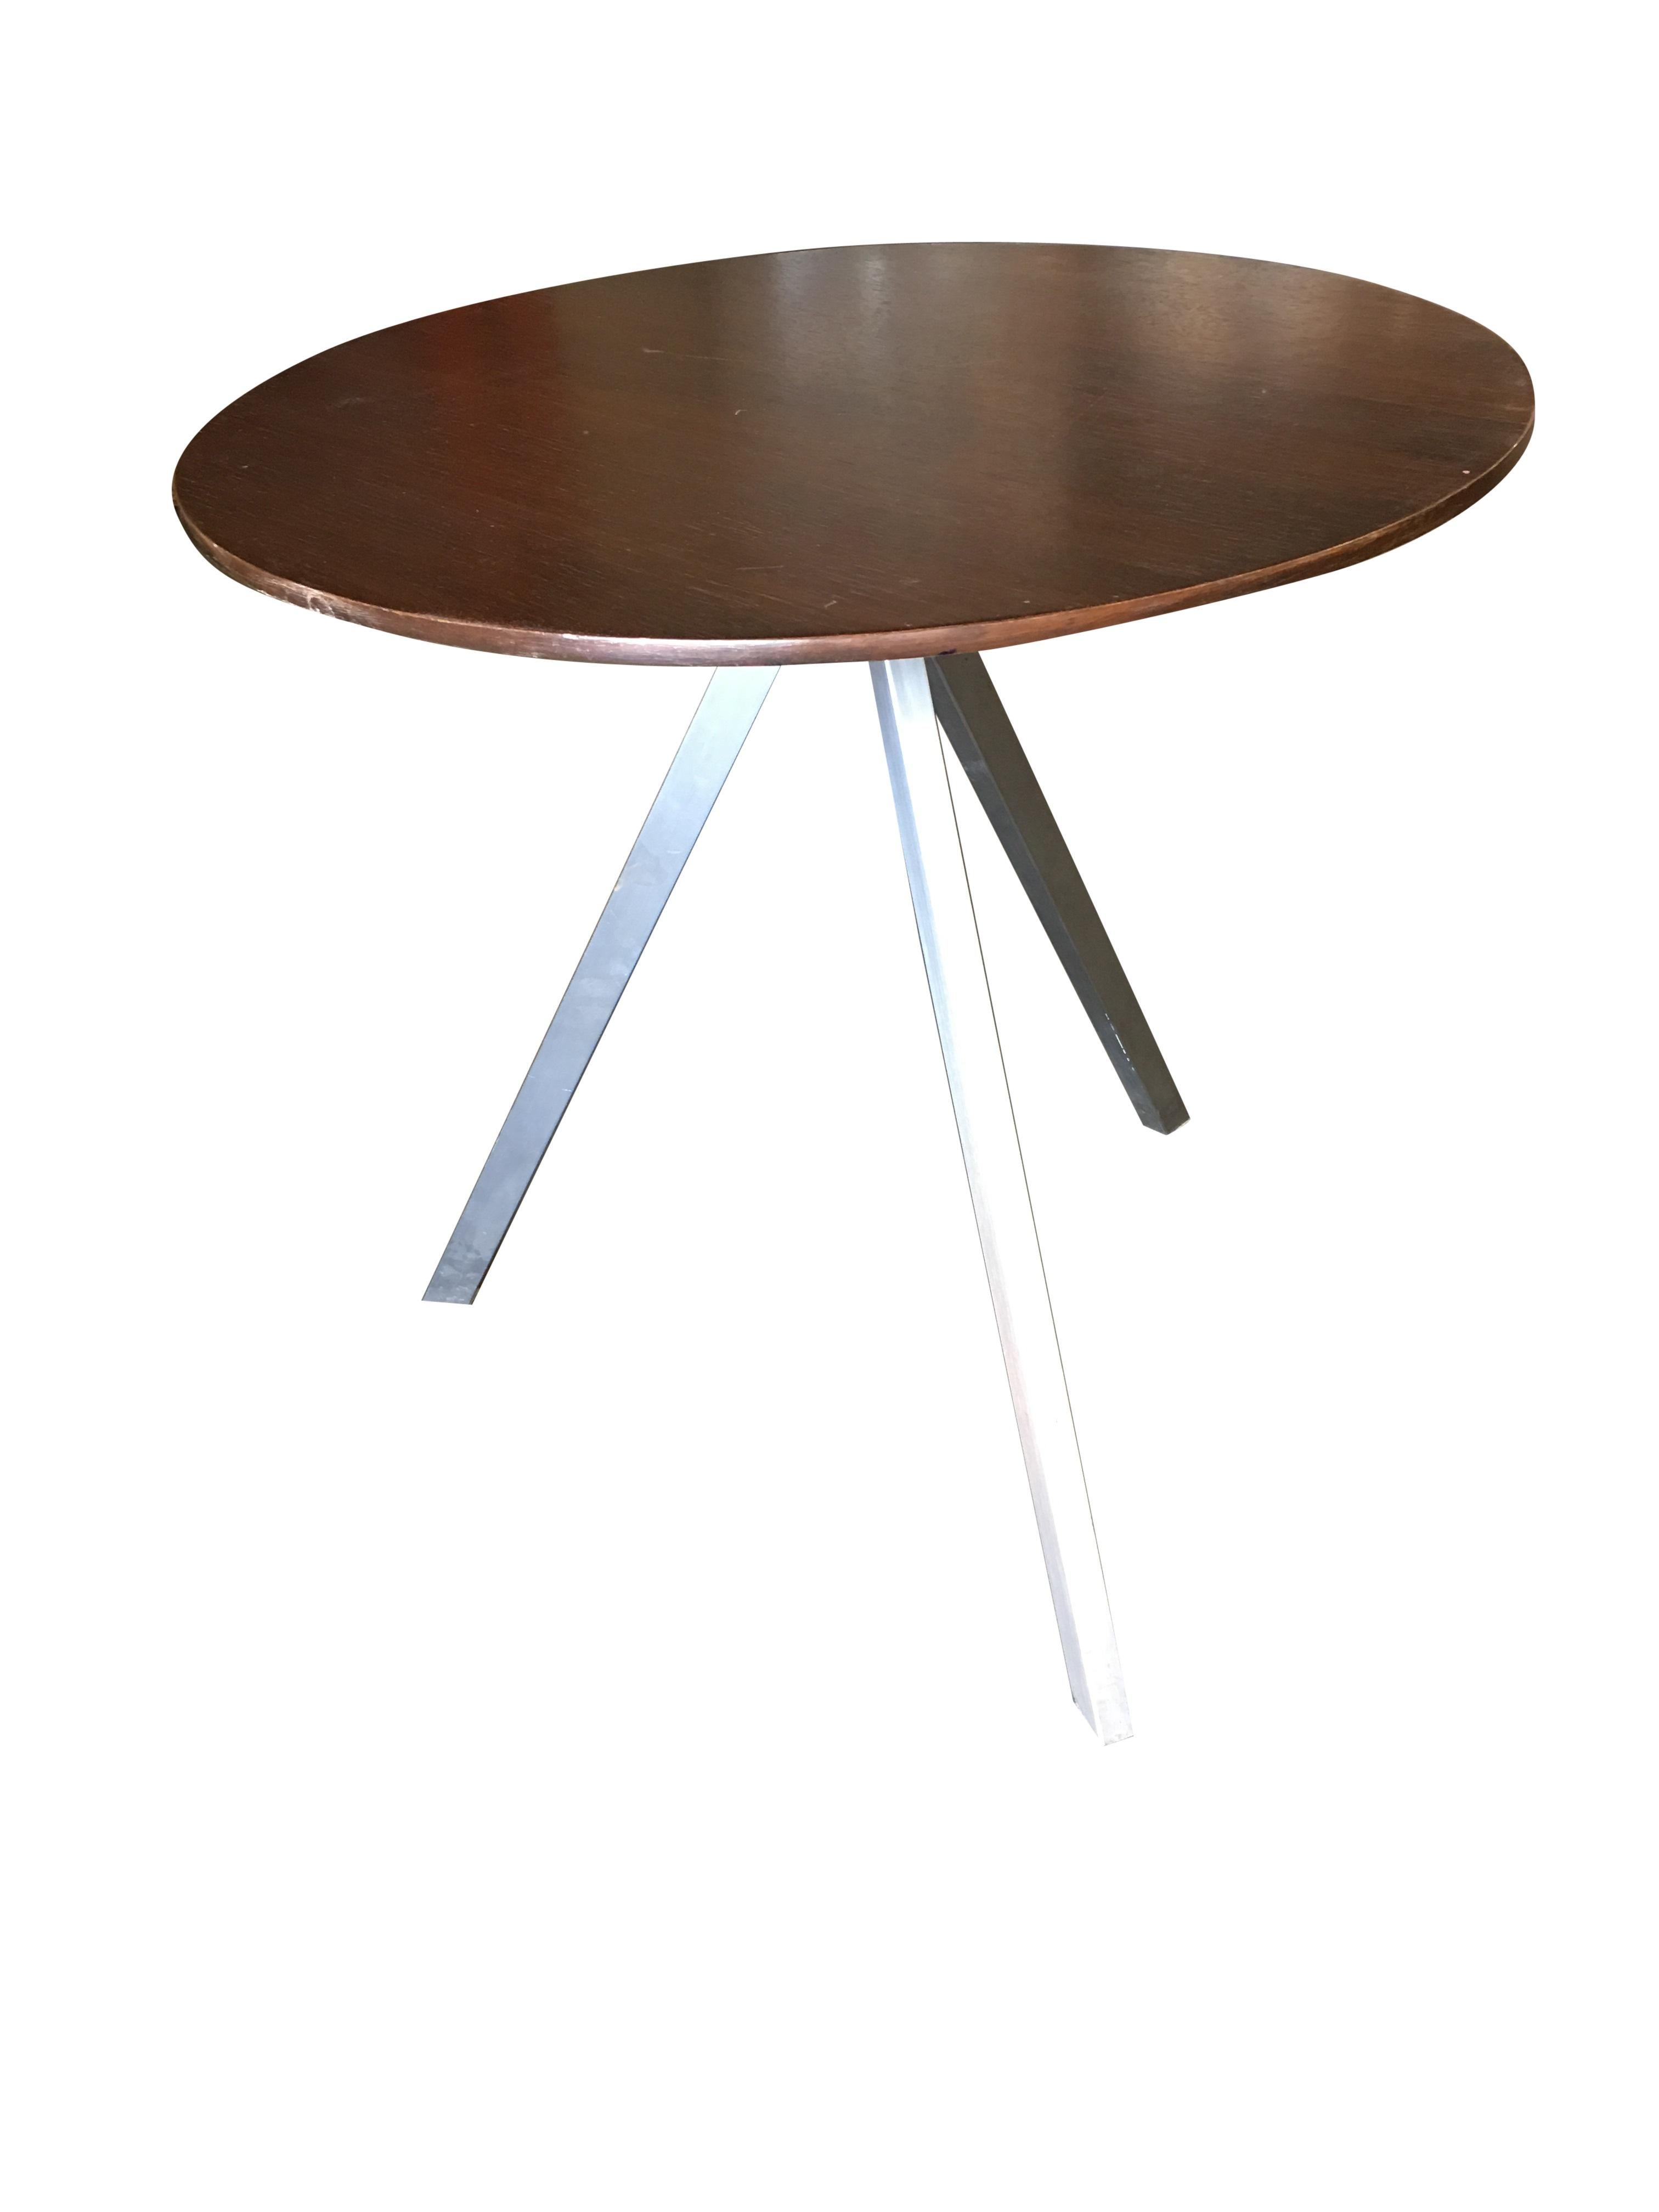 Large tripod leg coffee table featuring a dark stained oak top and a silver powder-coated 